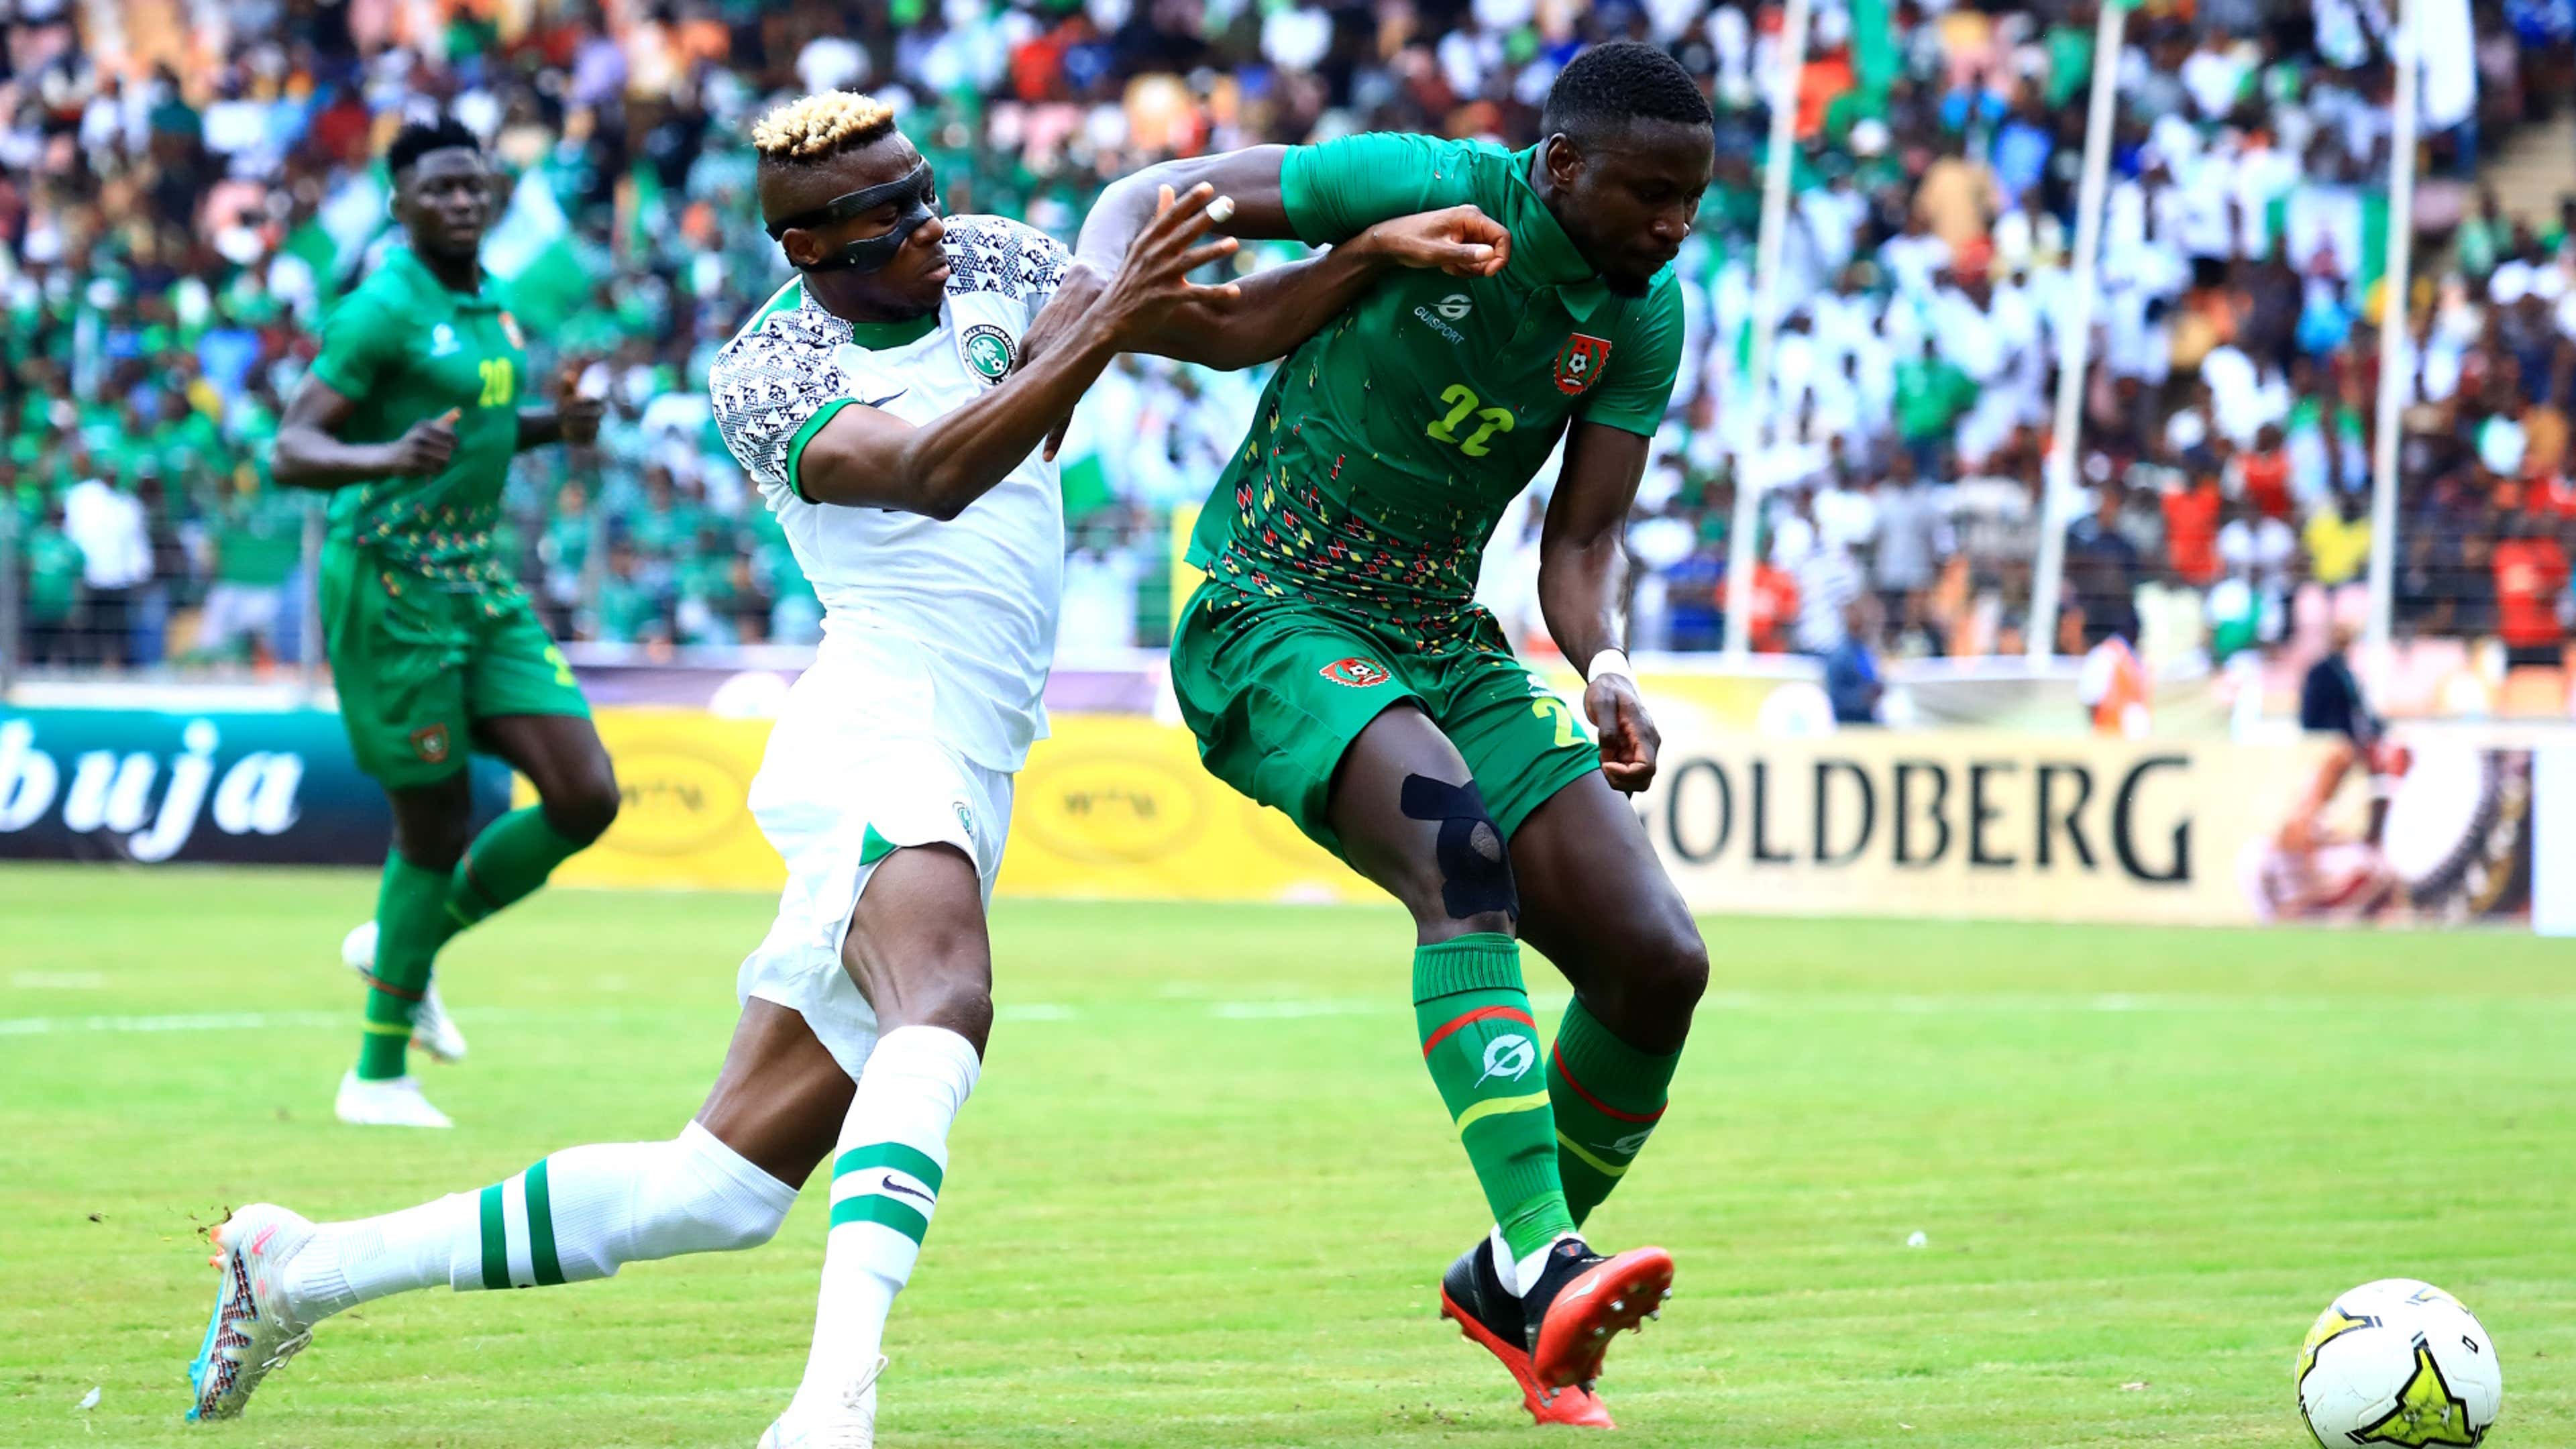 Victor Osimhen of Nigeria challenges Opa Sangante of Guinea-Bissau